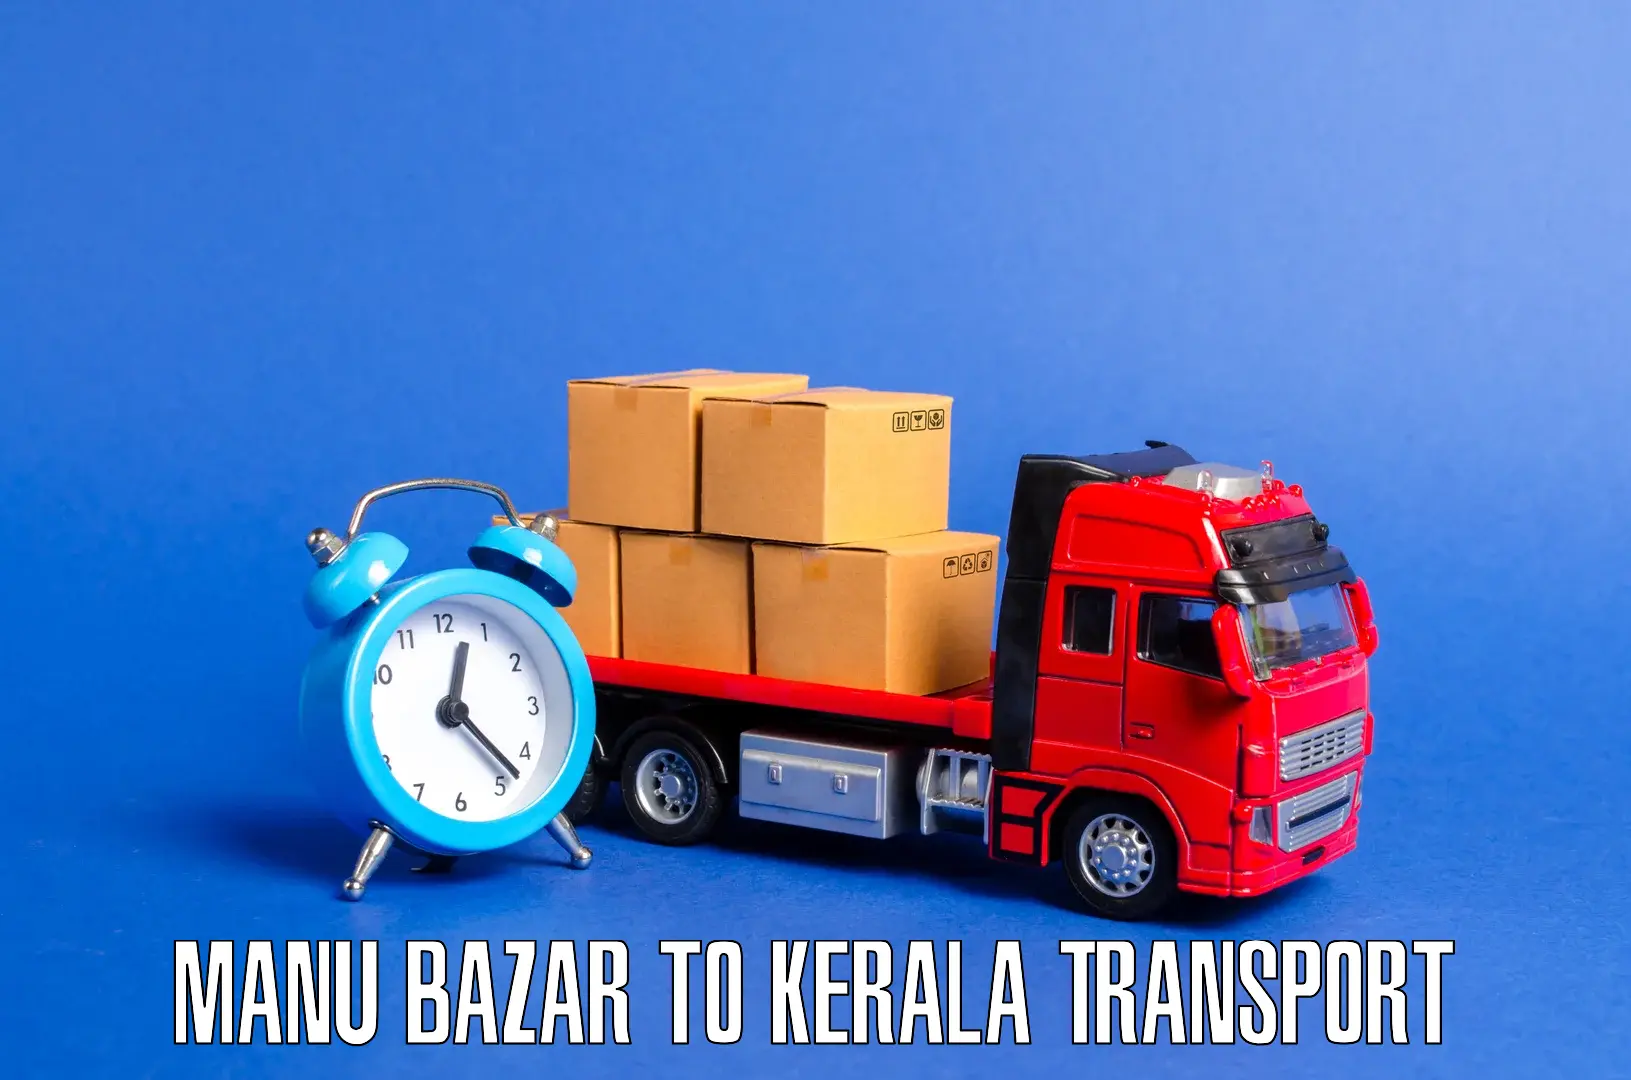 Transport services in Manu Bazar to Angamaly